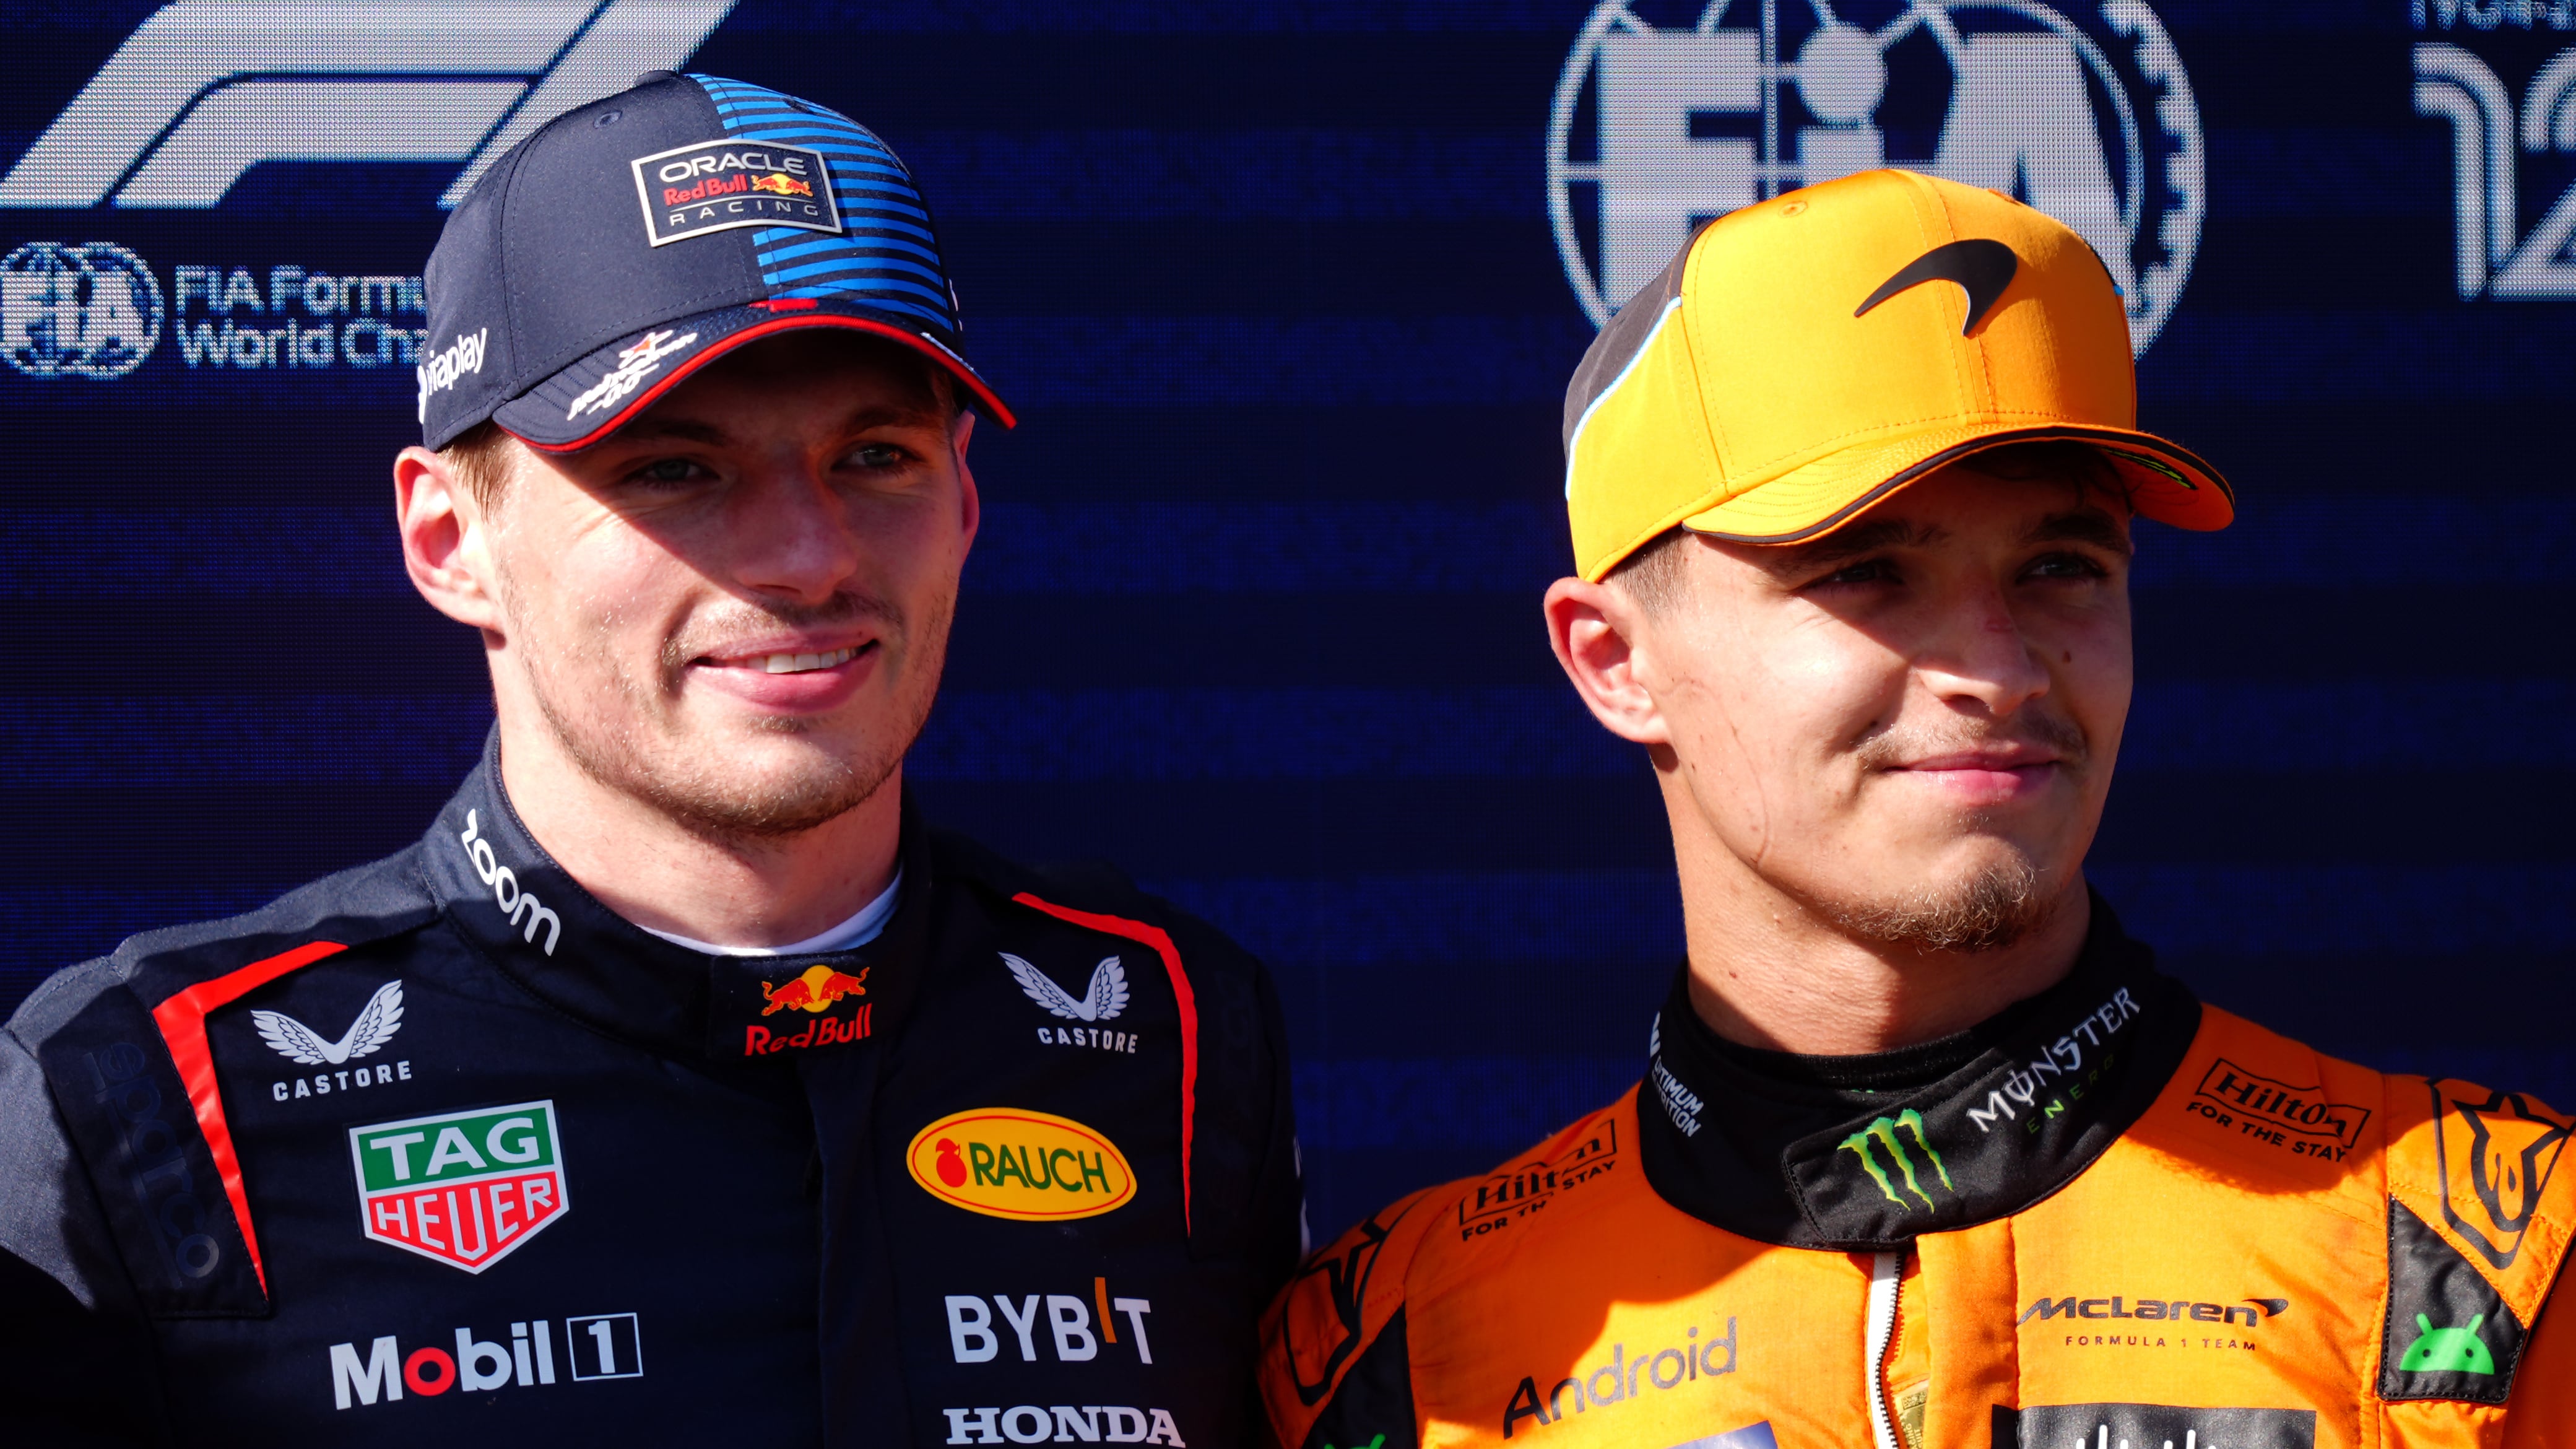 Max Verstappen and Lando Norris will start first and second on the grid in Austria